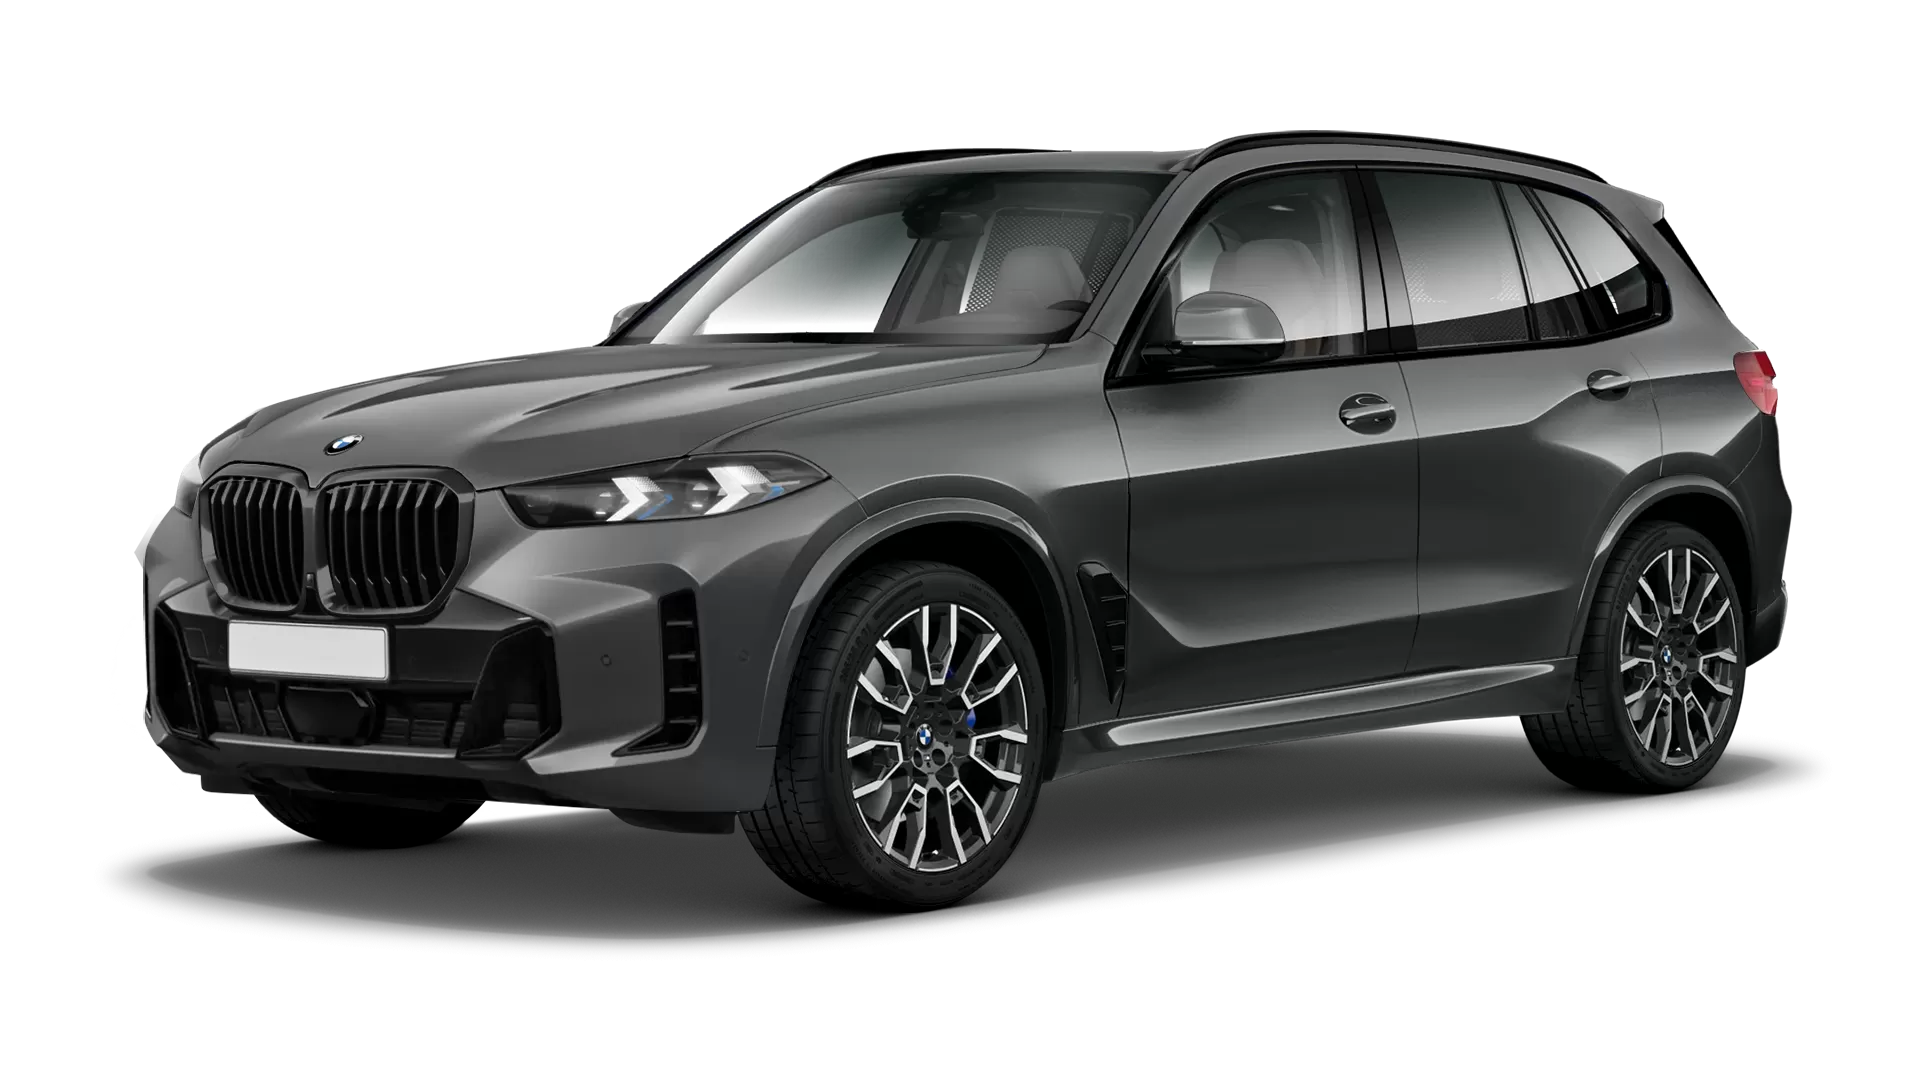 BMW X5 G05 LCI Facelift stock front view in Dravit Grey color